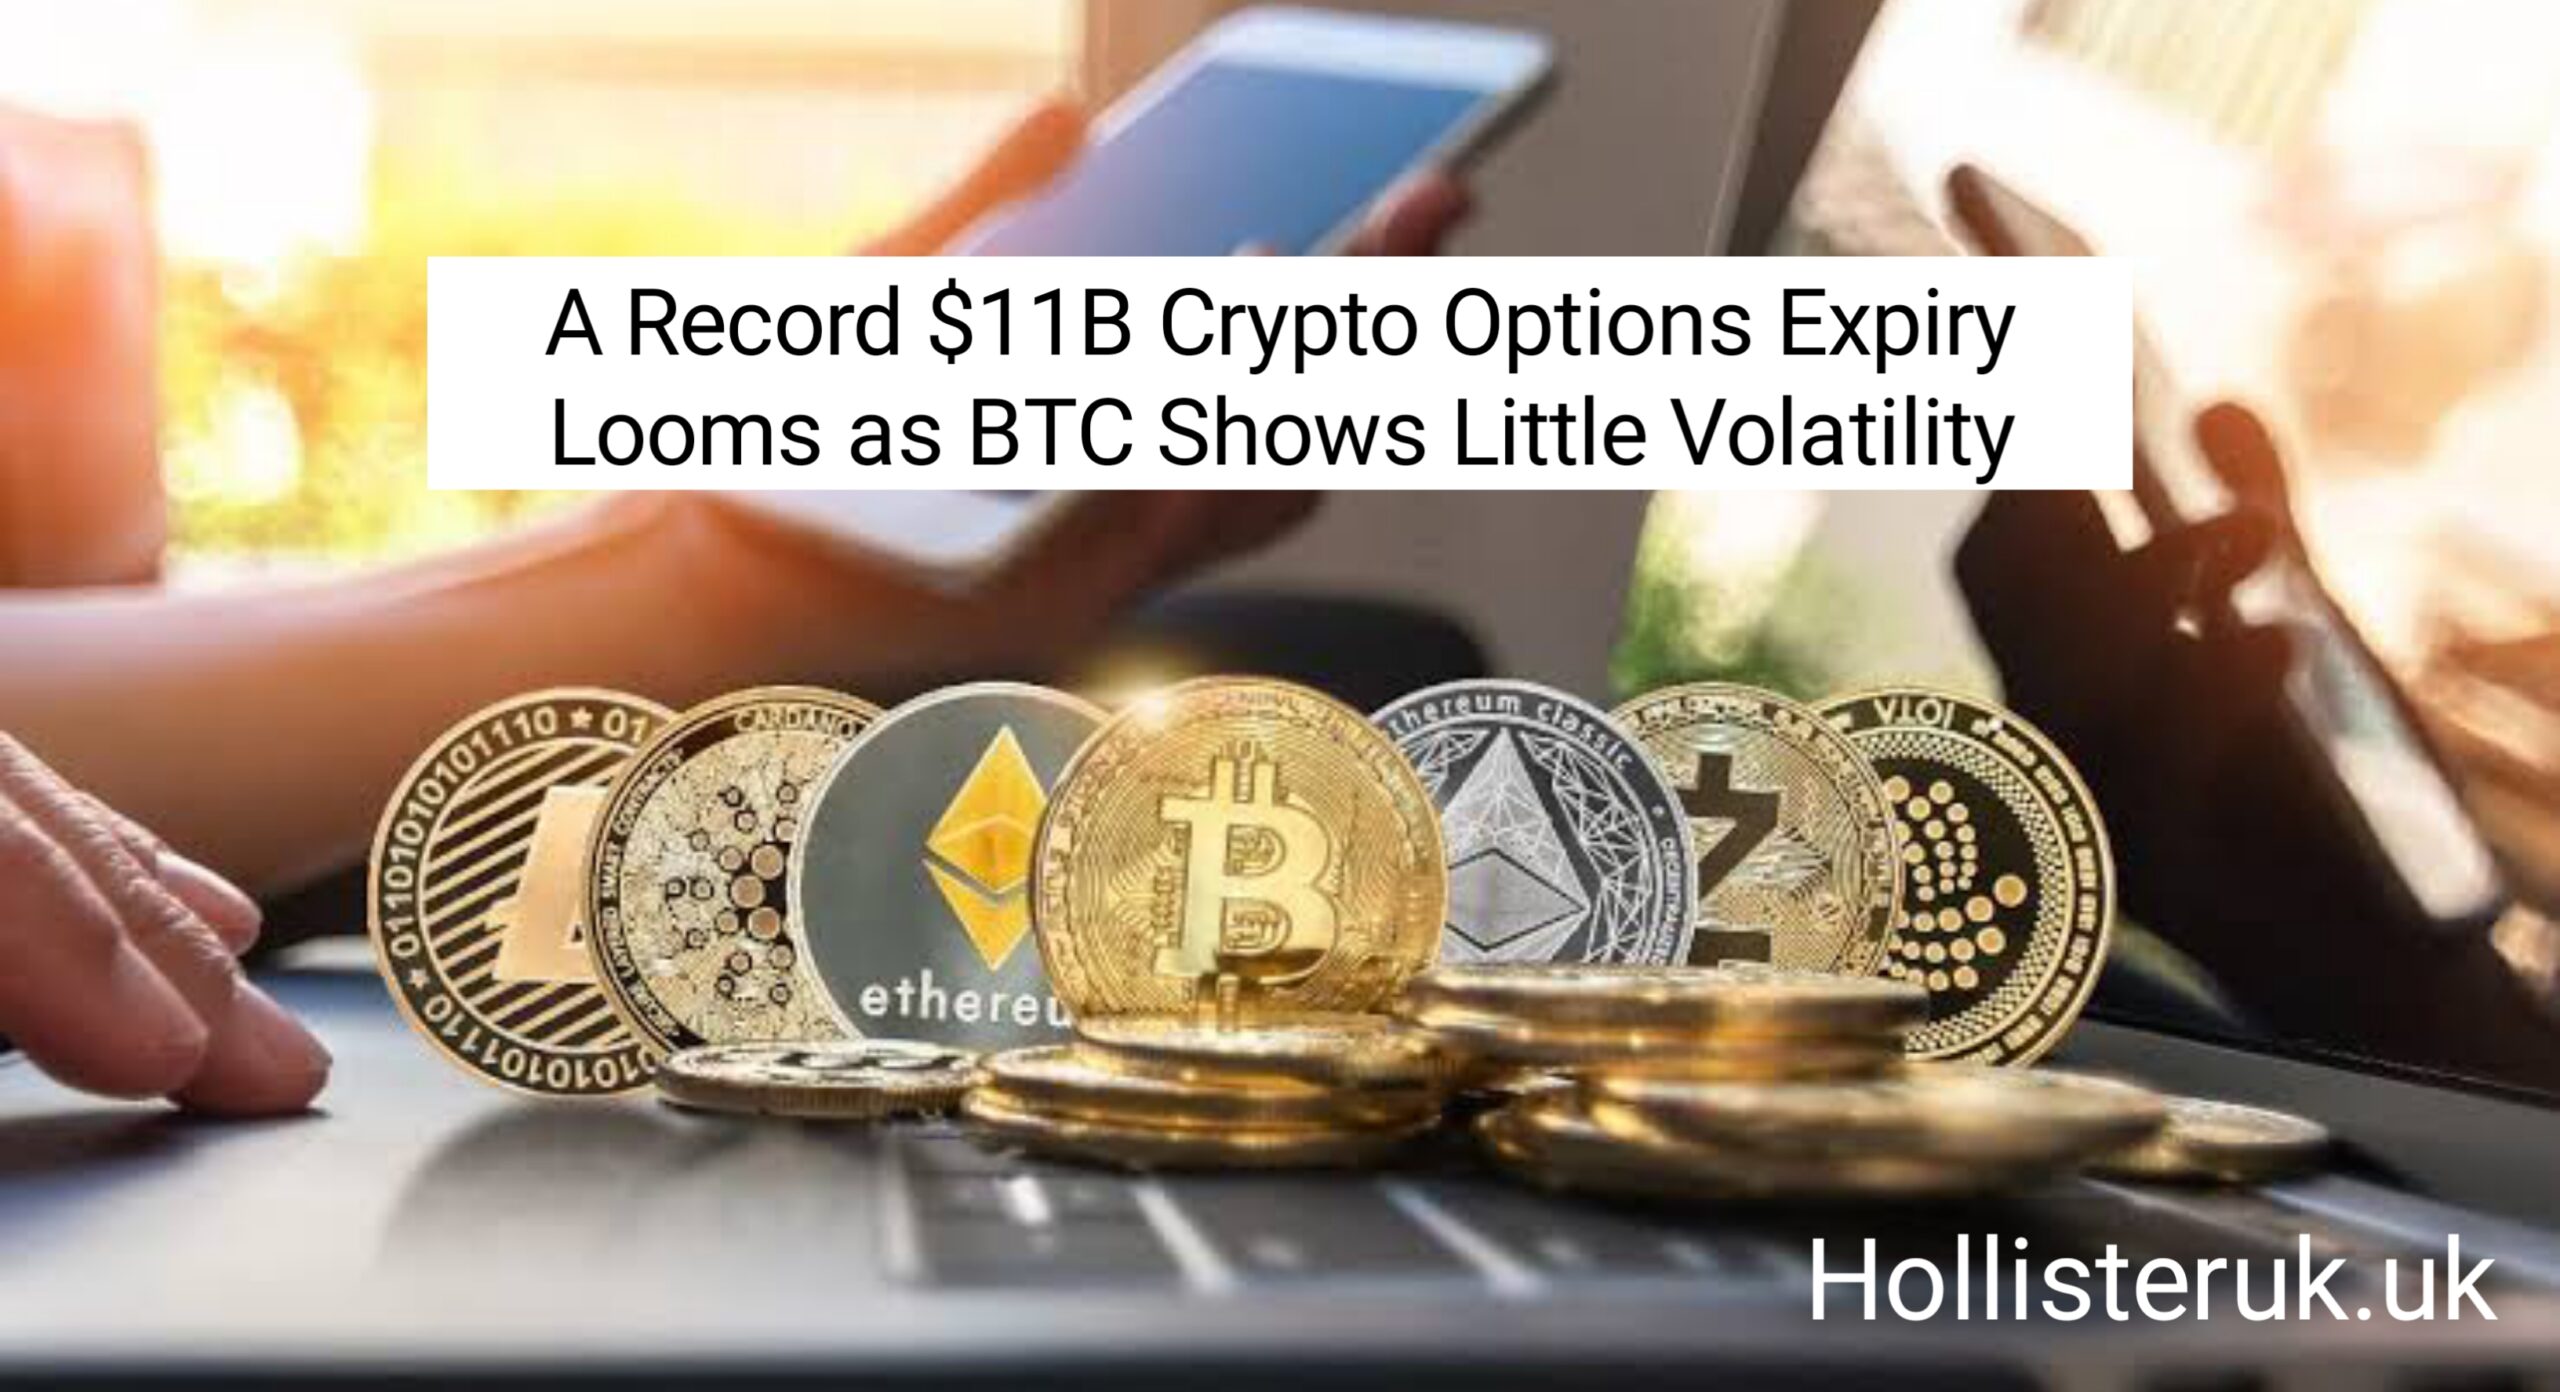 A Record $11B Crypto Options Expiry Looms as BTC Shows Little Volatility